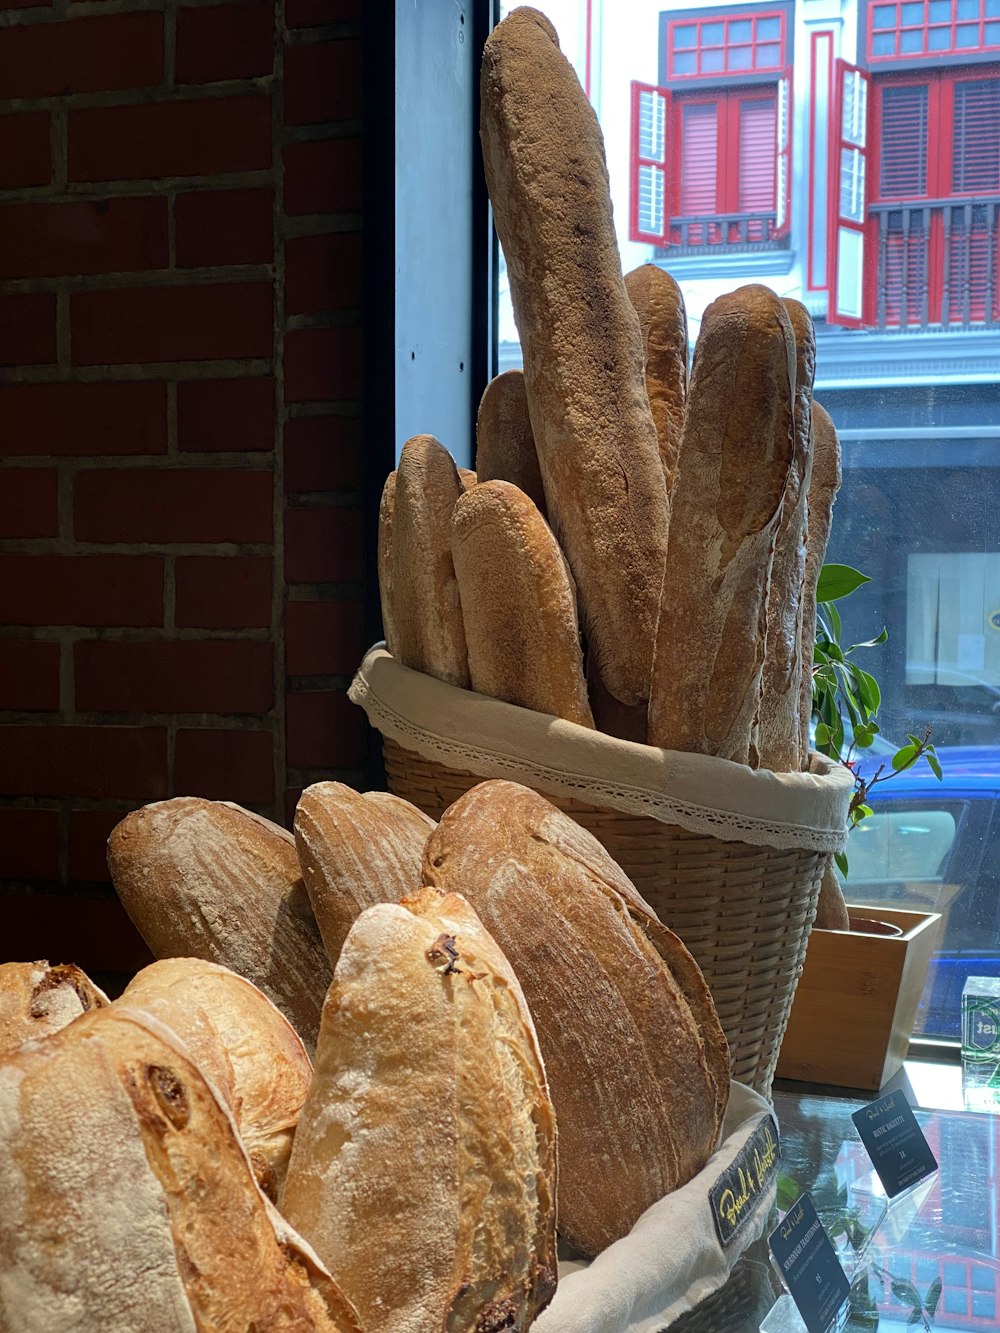 a basket filled with lots of bread next to a window